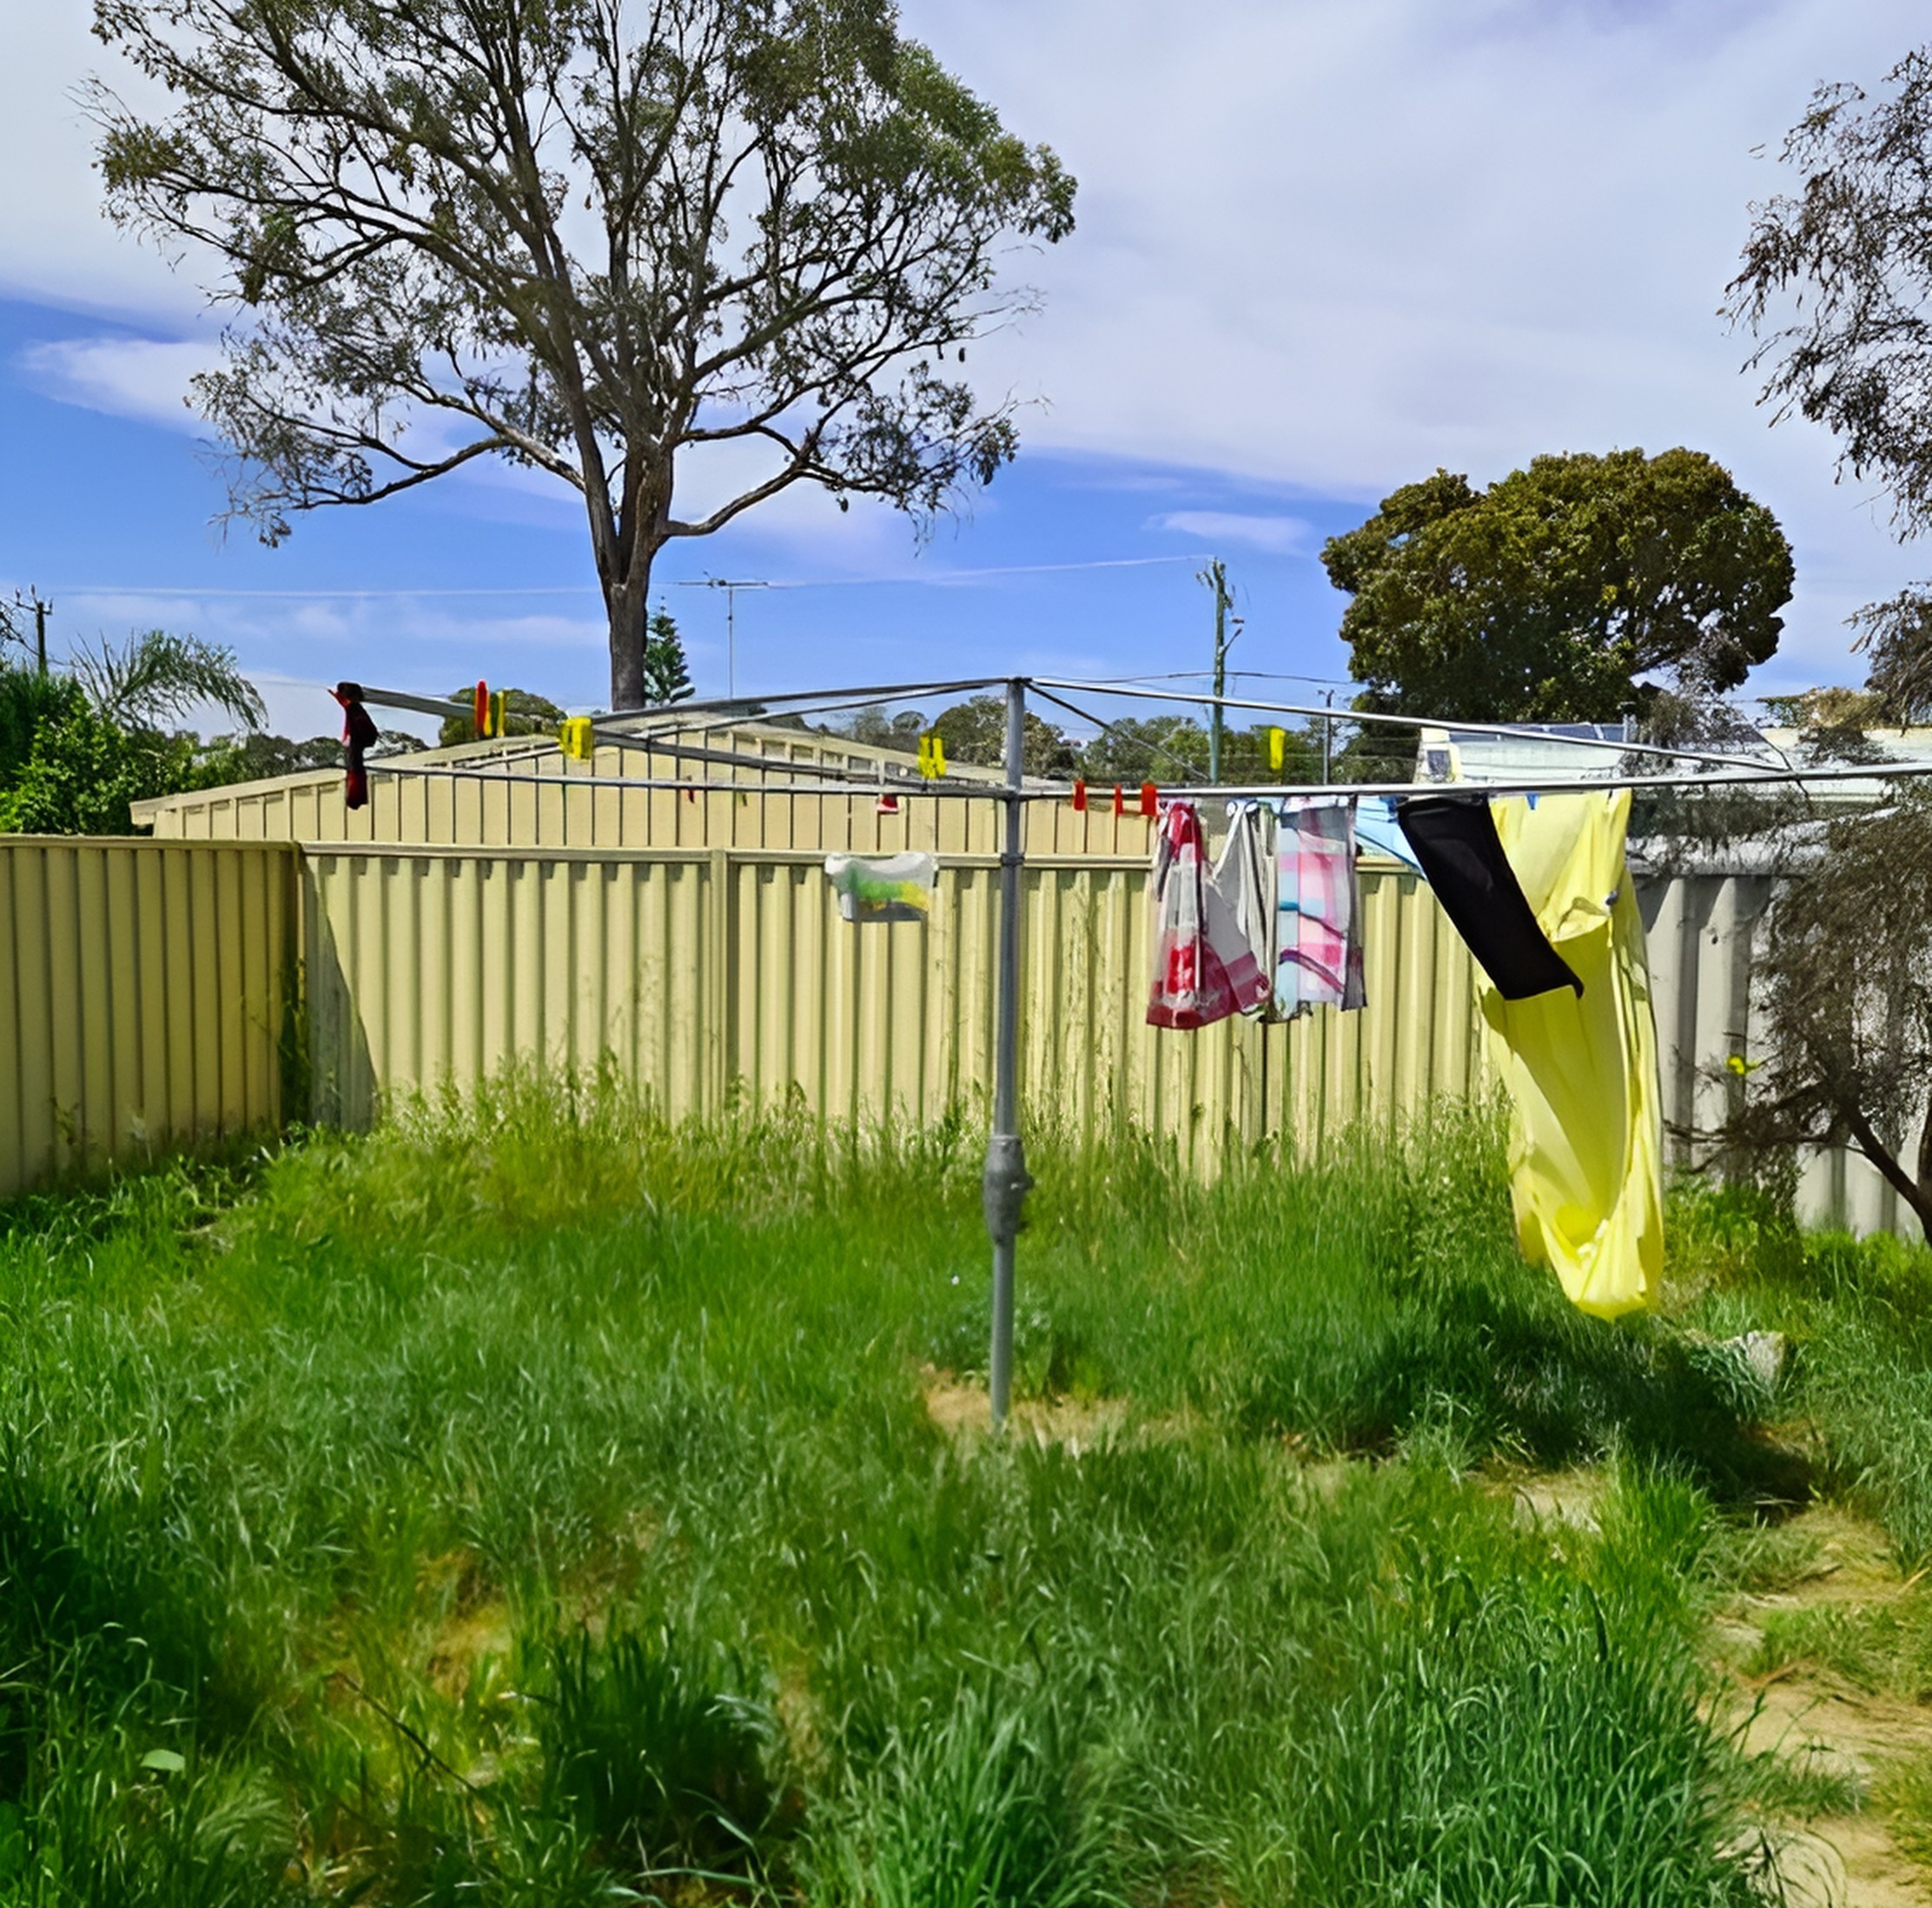 Rotary Clothesline for a Family of 5 14. Robust Galvanised Wire Tailored for the Australian Climate